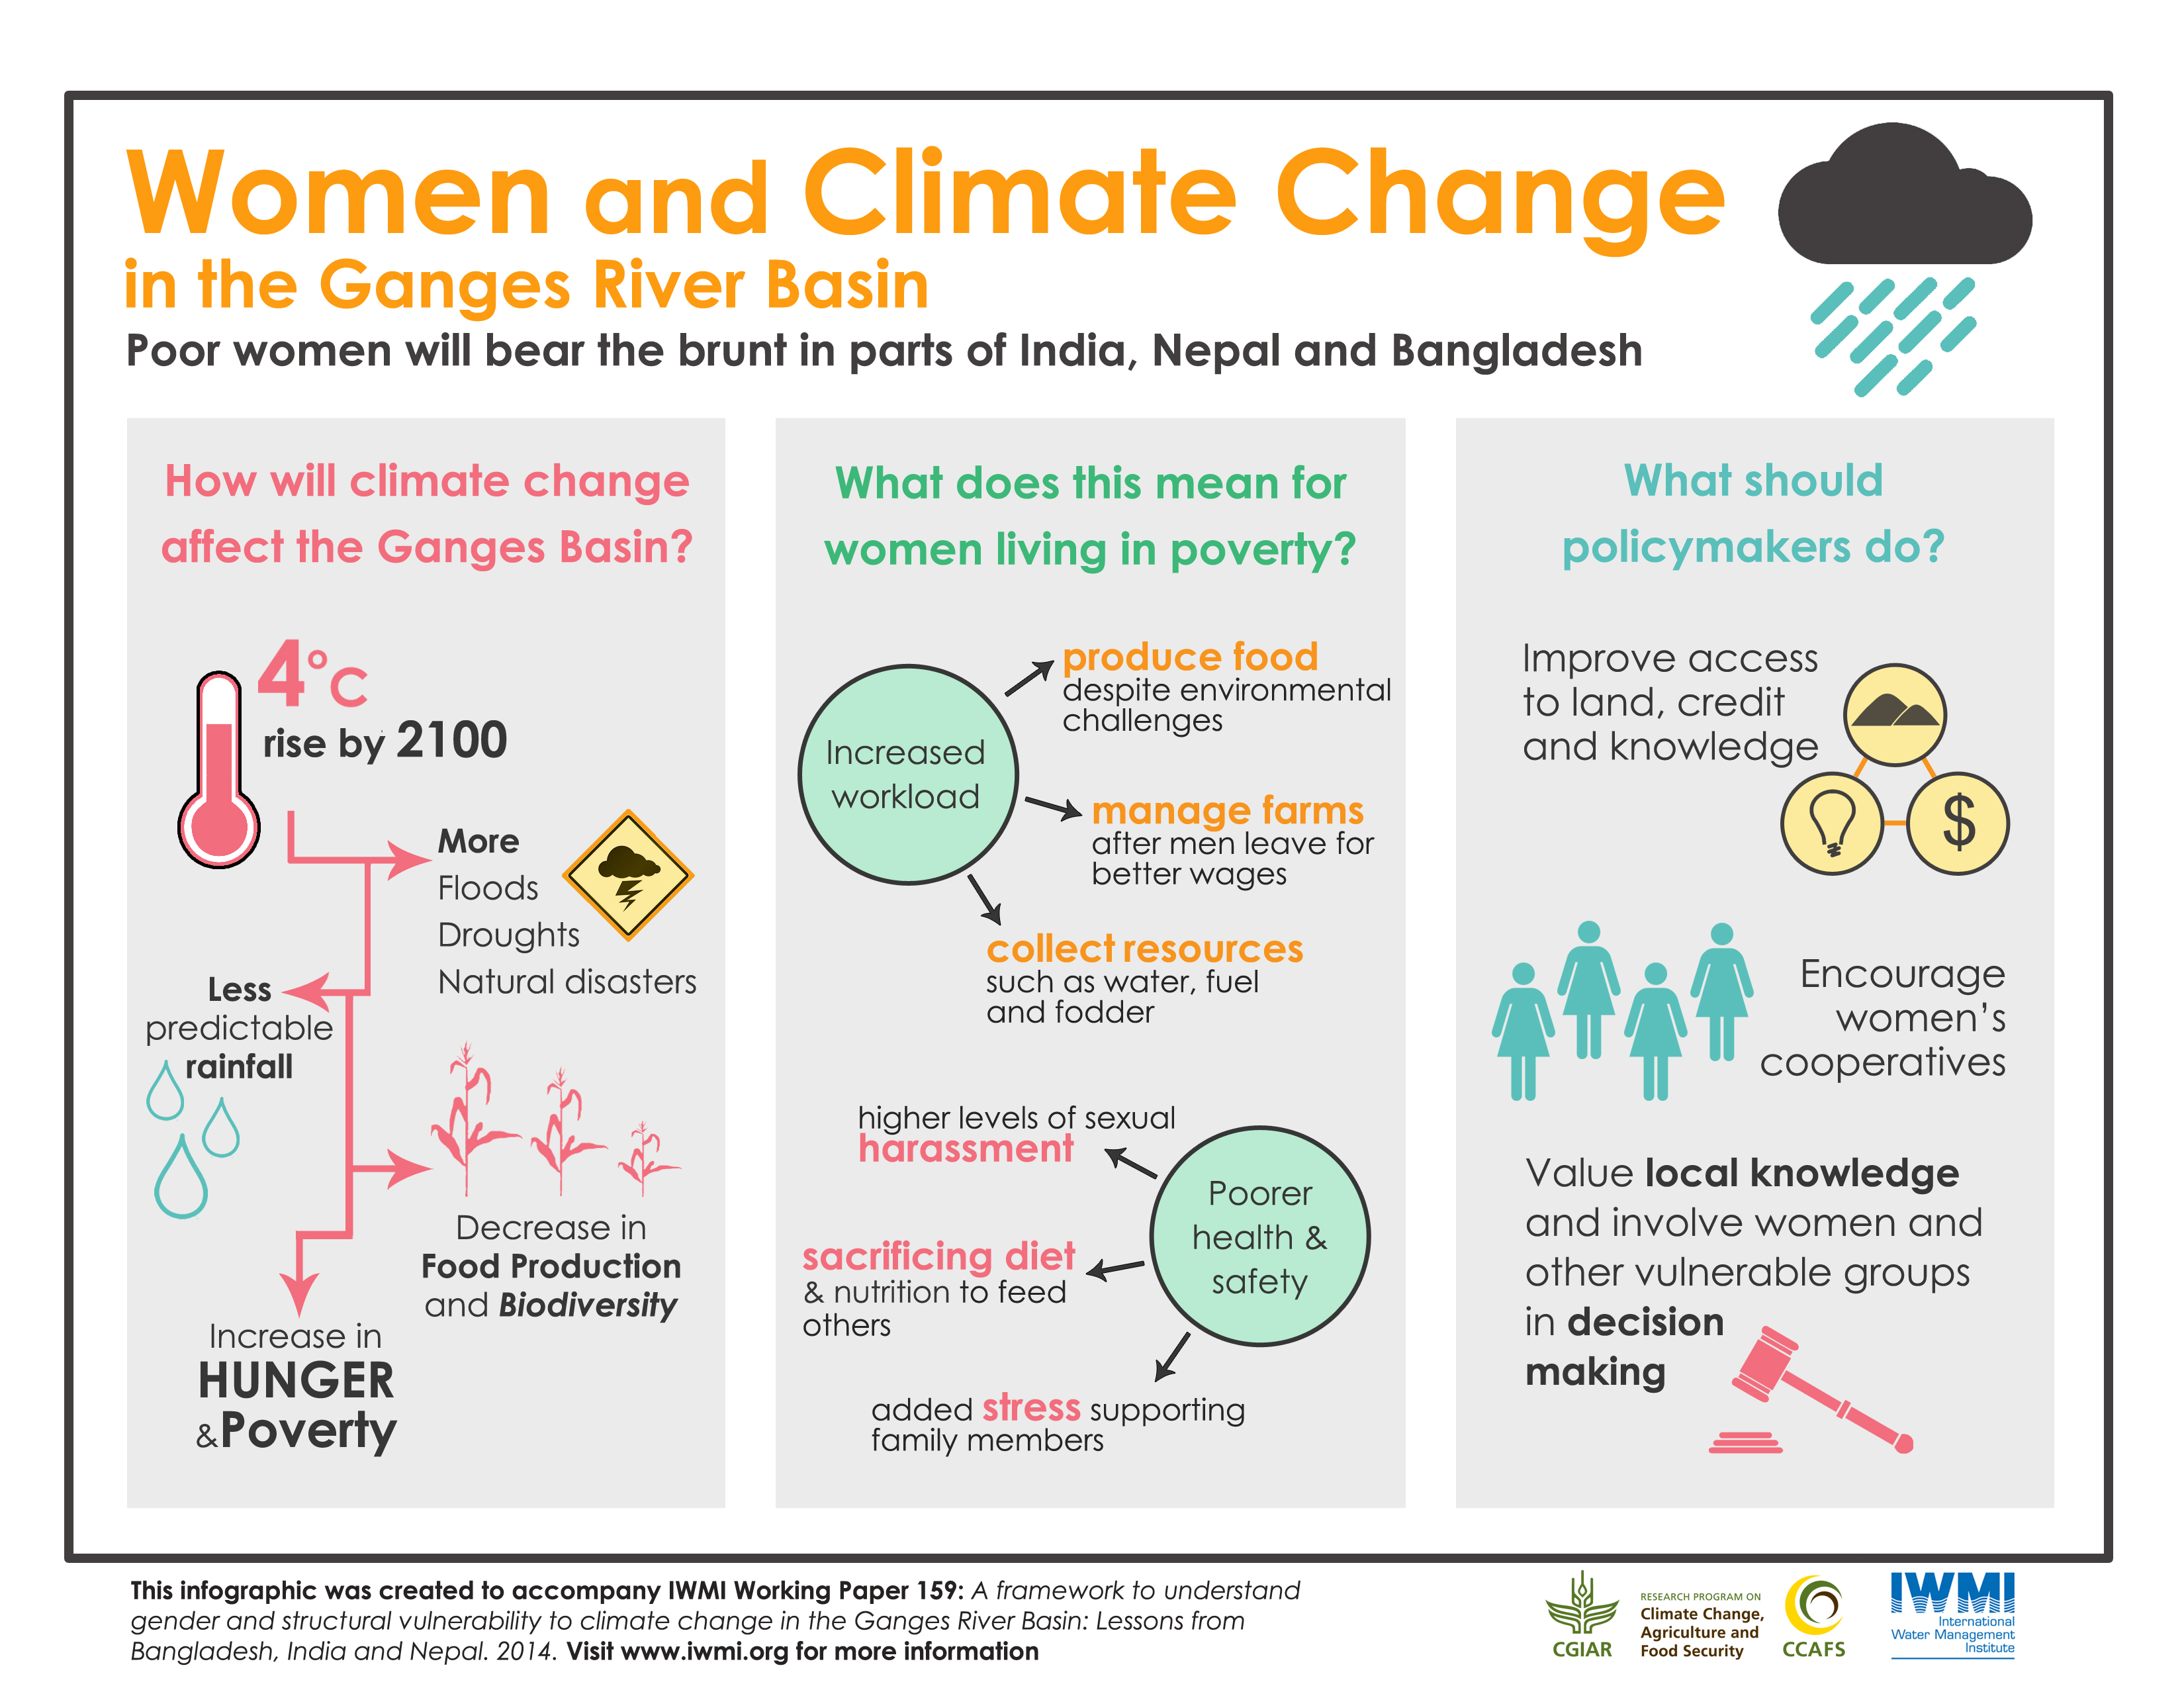 Download the Infographic: Women and Climate Change in the Ganges River Basin